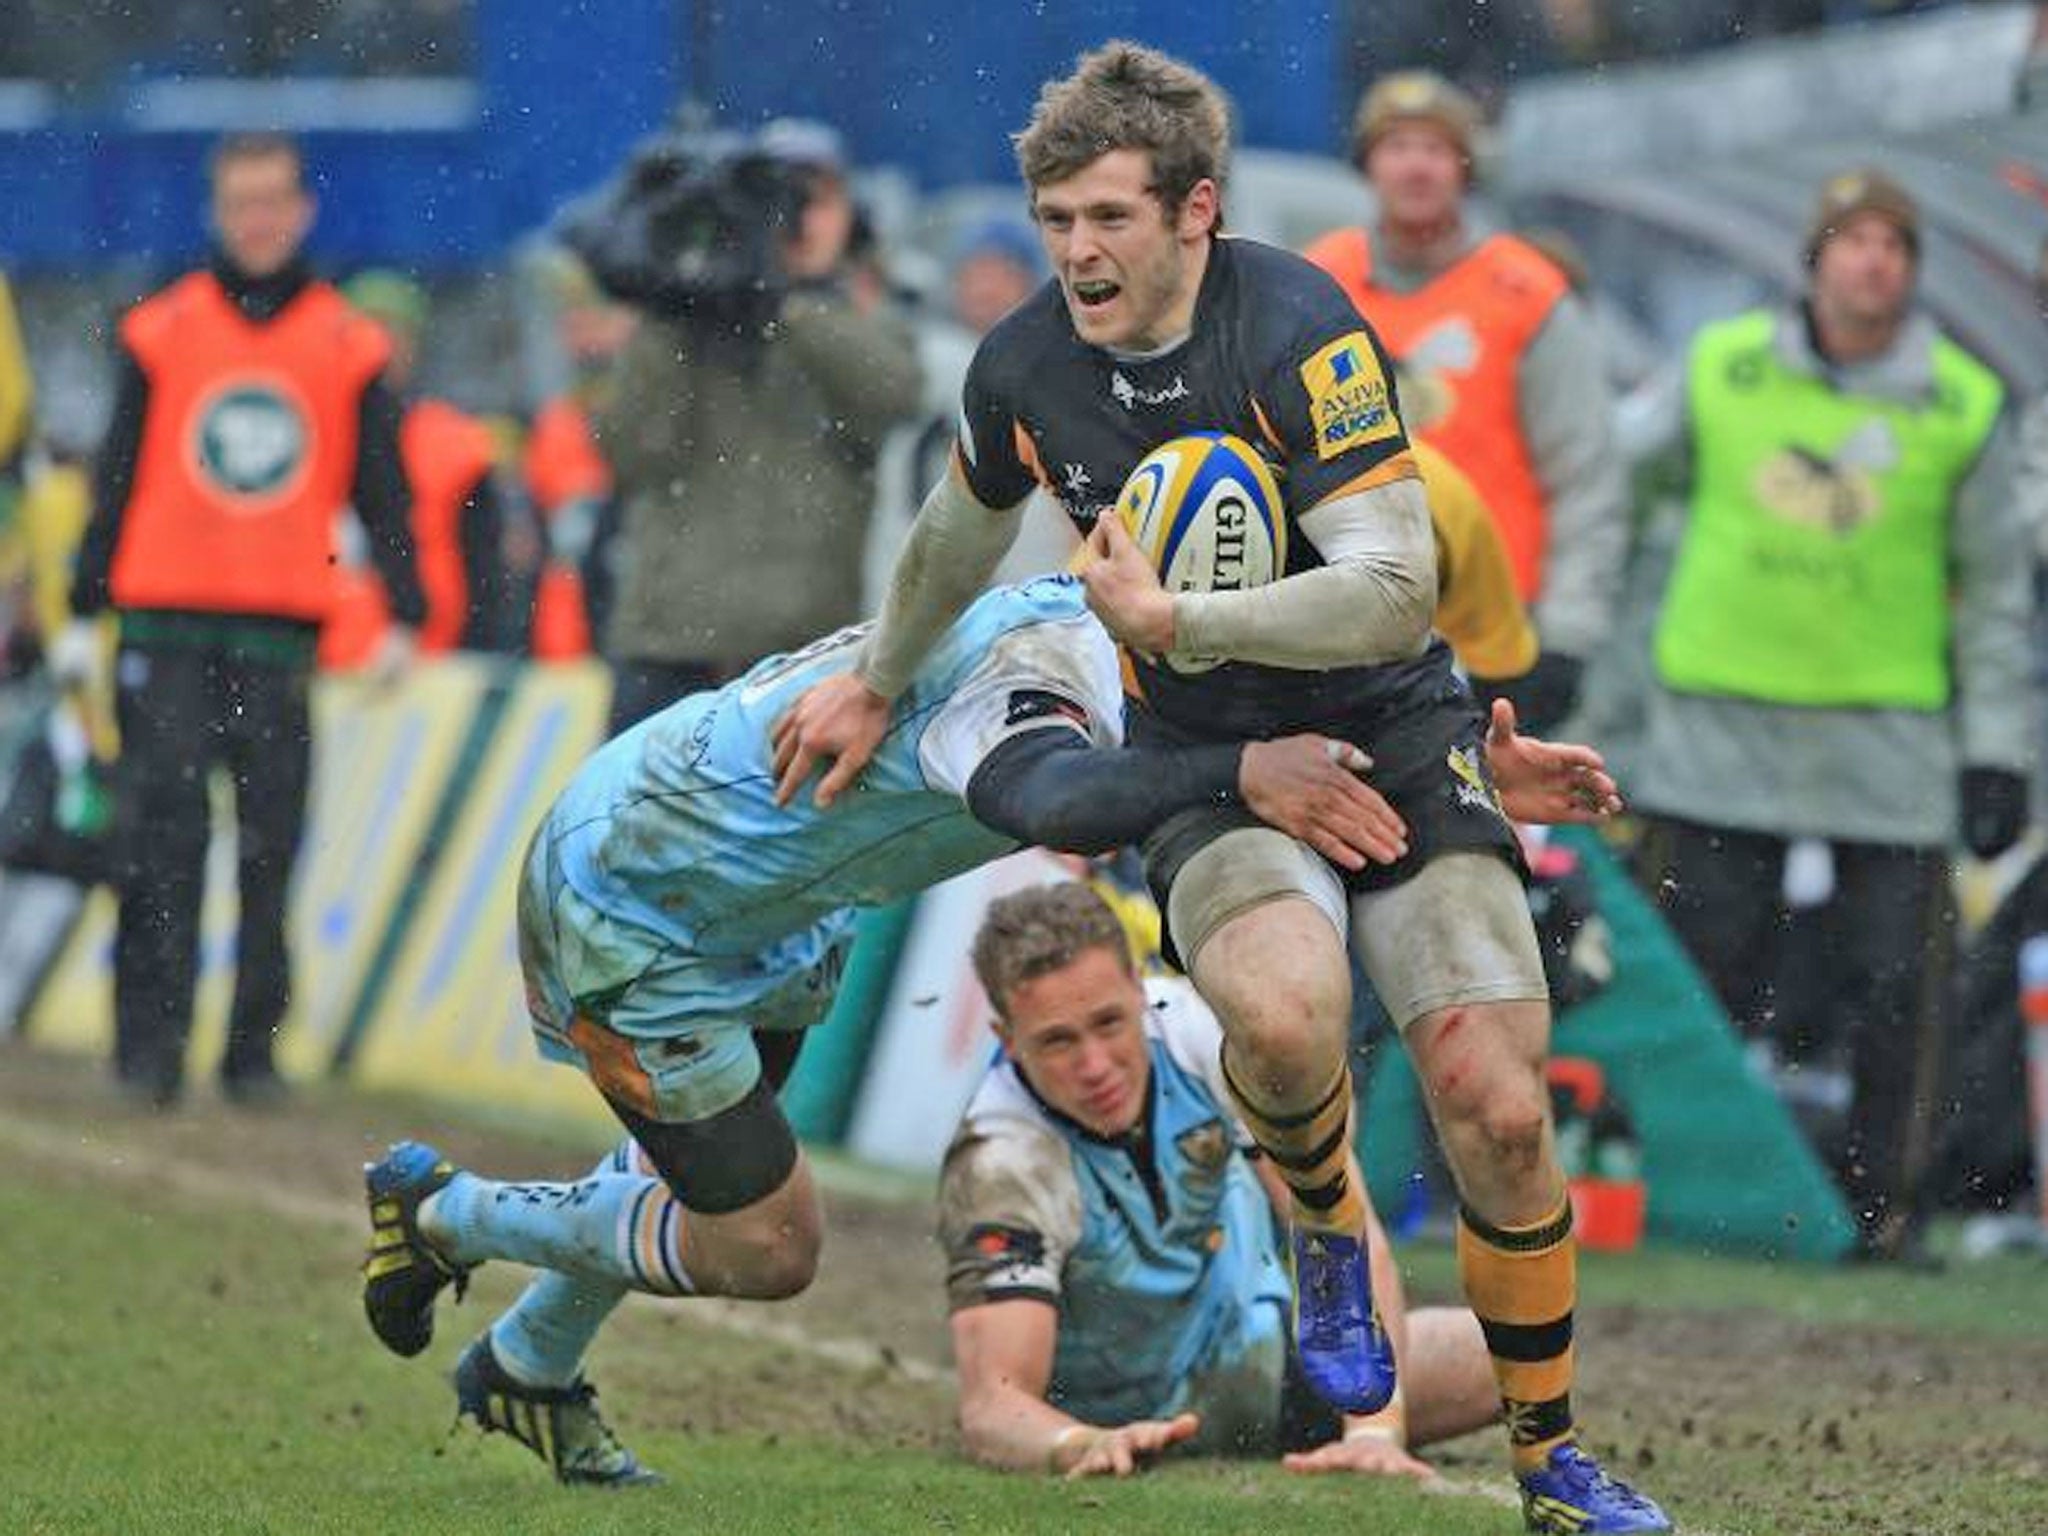 Elliot Daly evades a tackle on his way to scoring Wasps’ second try